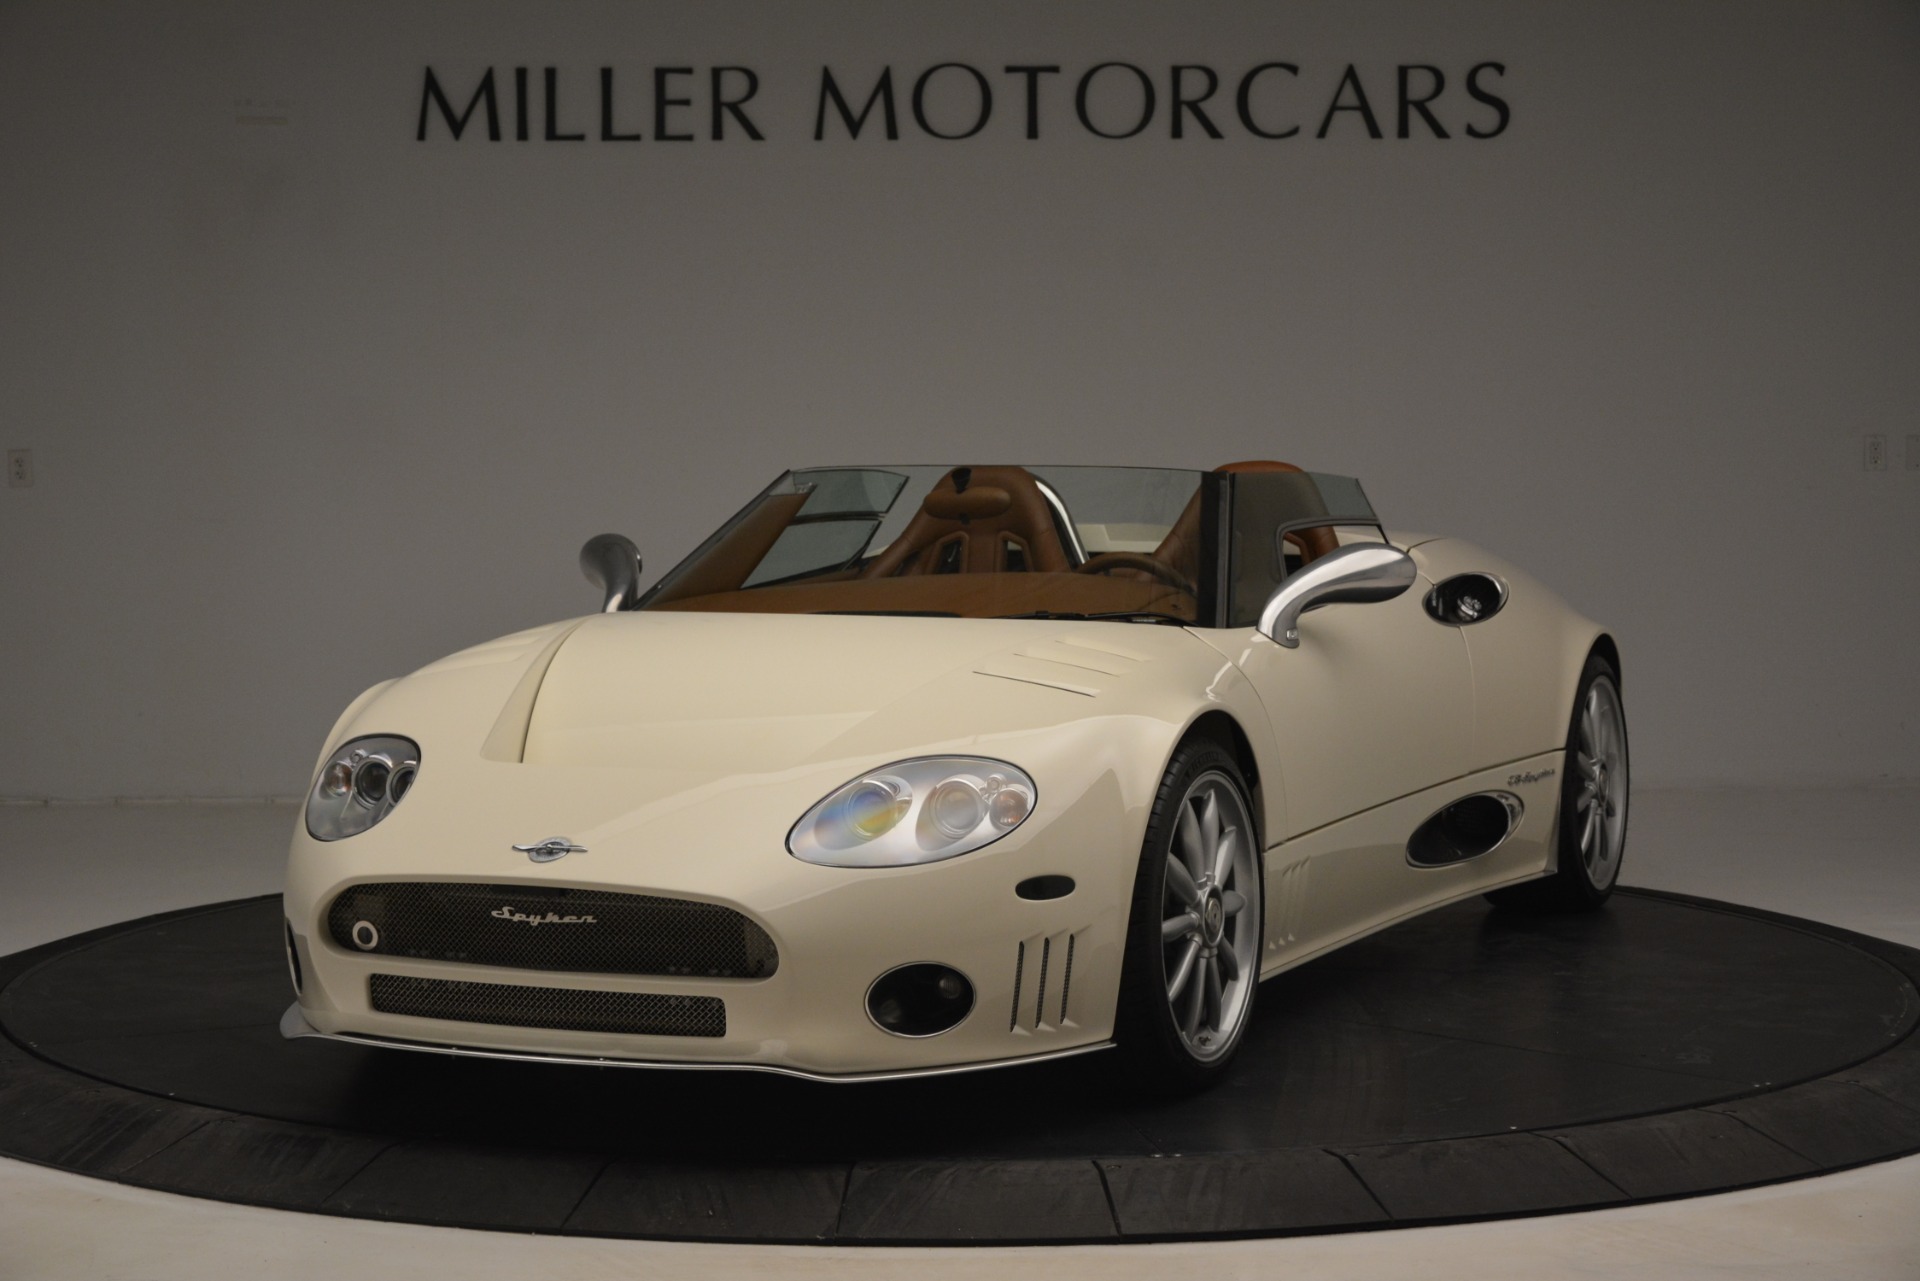 Used 2006 Spyker C8 Spyder for sale Sold at Bugatti of Greenwich in Greenwich CT 06830 1